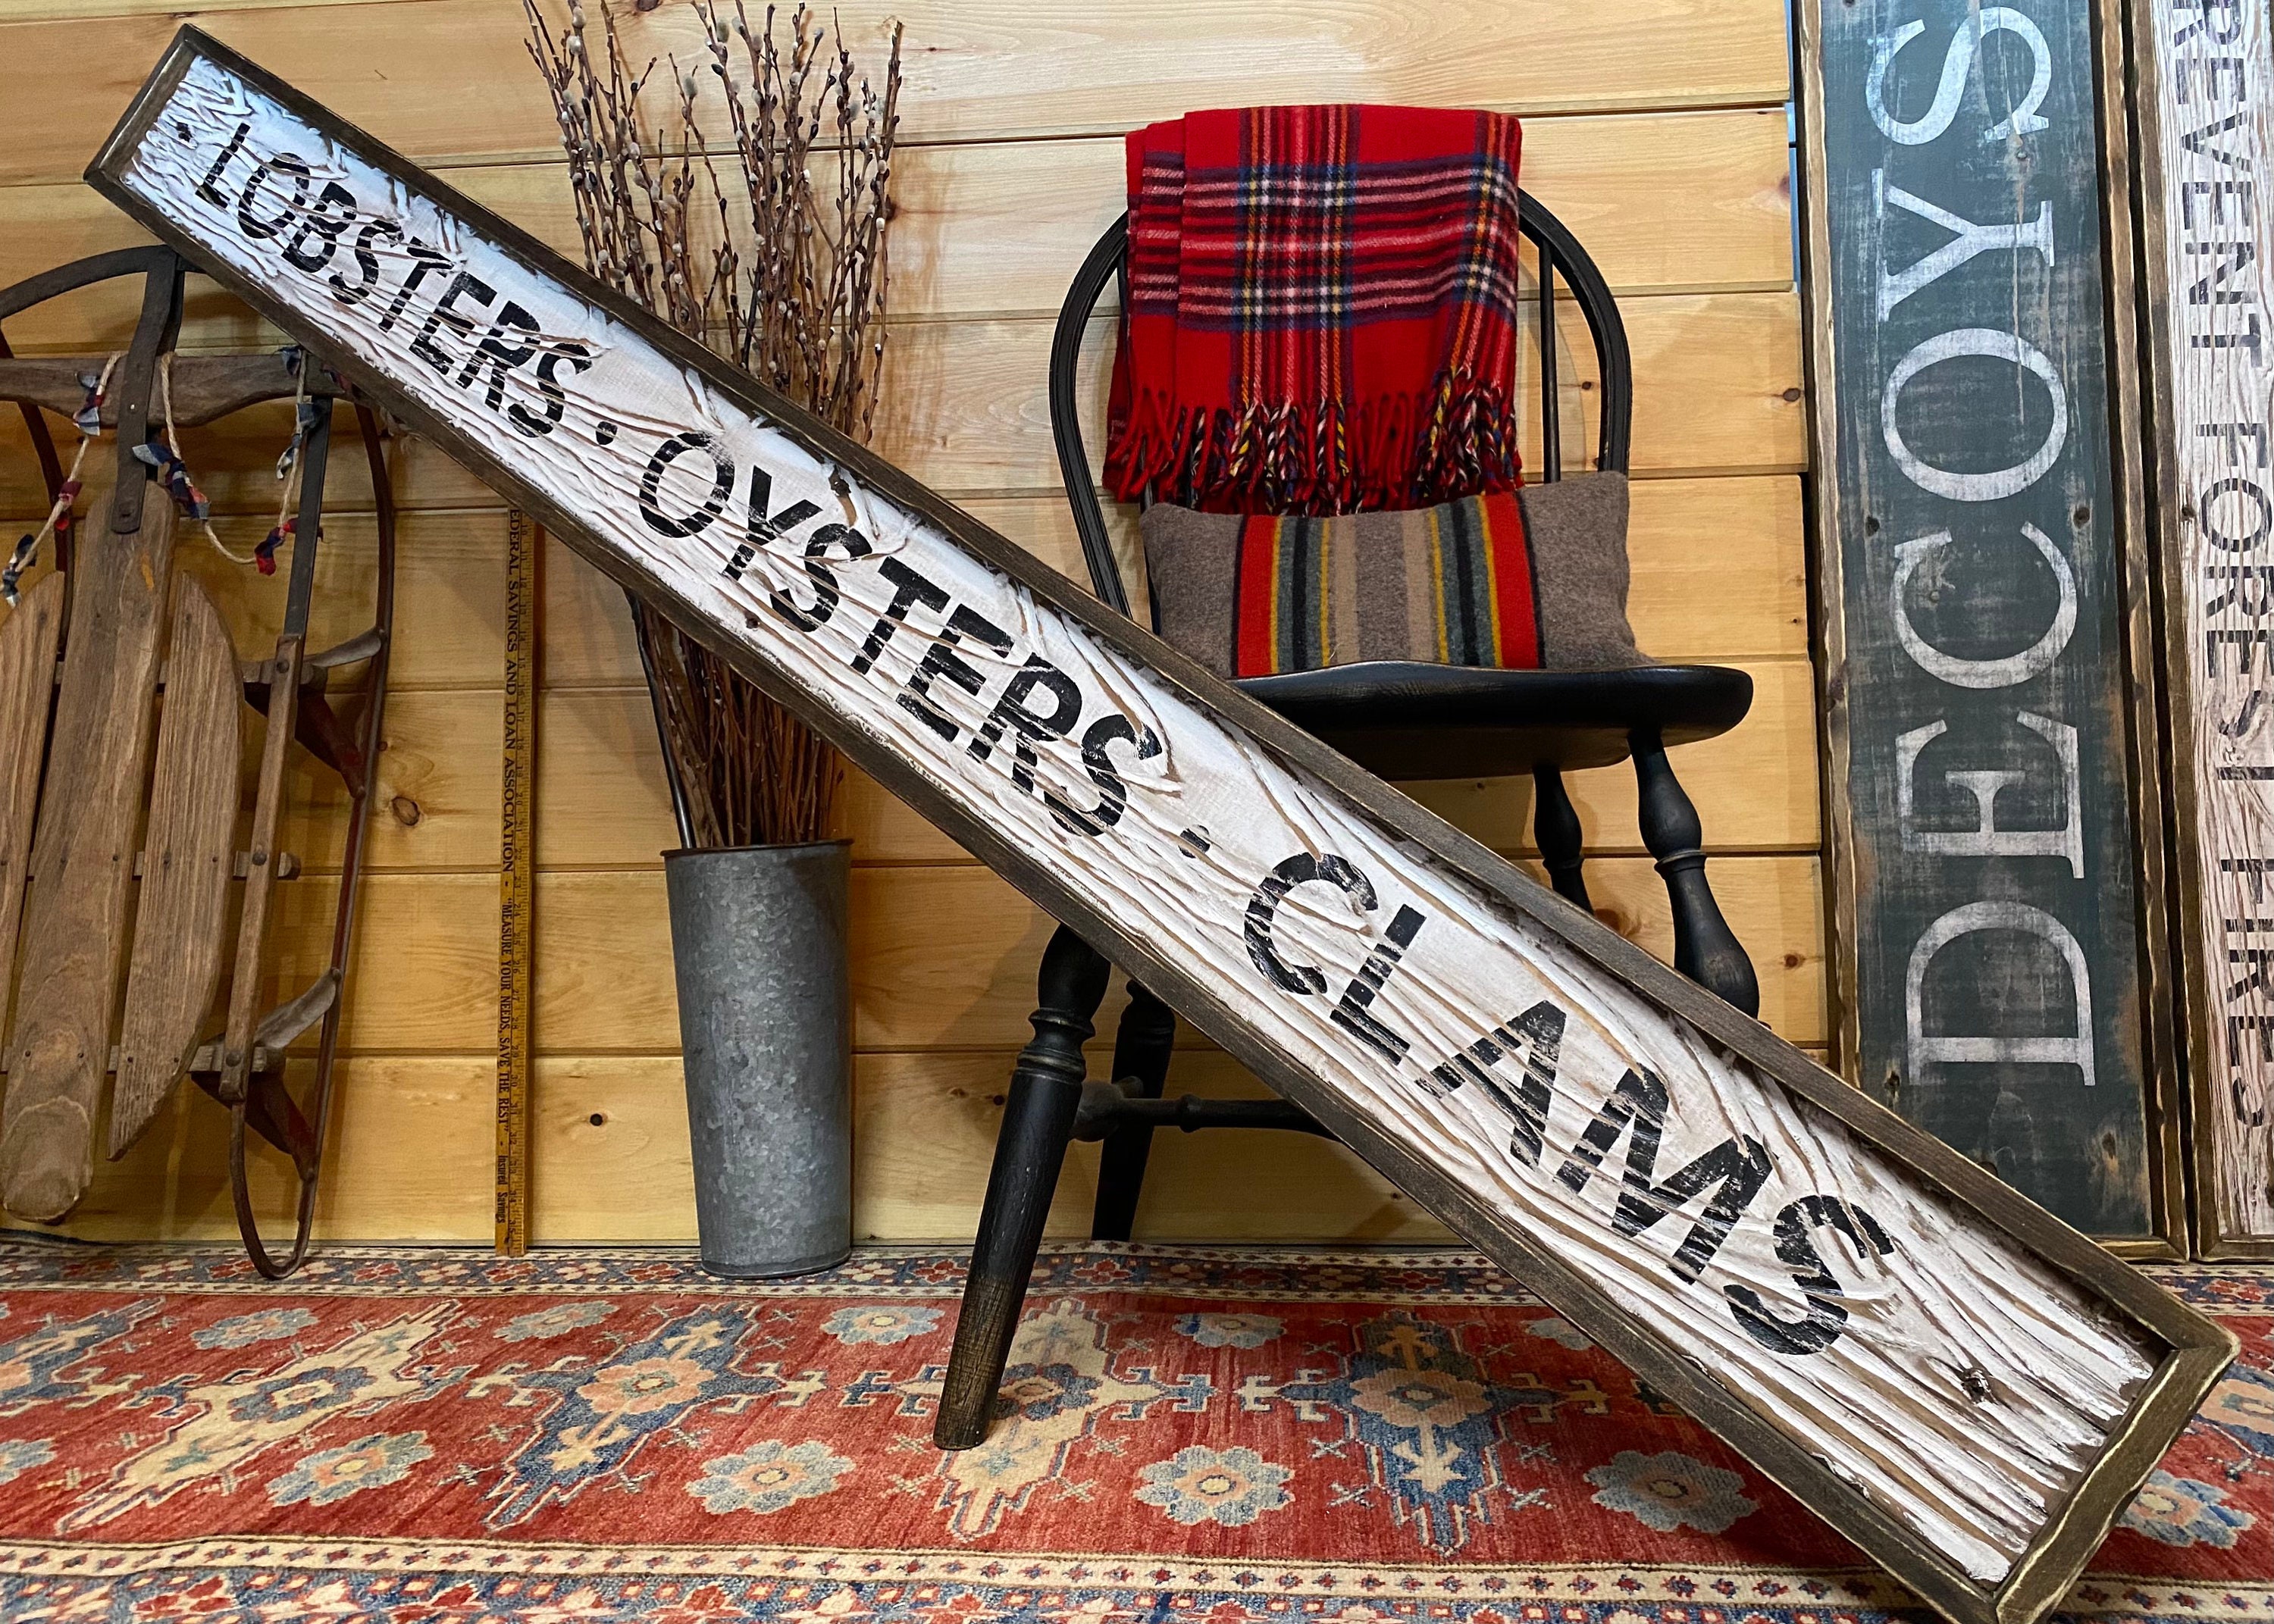 Seafood Wood Sign, Lobsters Oysters Clams Coastal Decor, Beach House, Nautical, Fresh Oyster Bar, Maine Large 6Ft